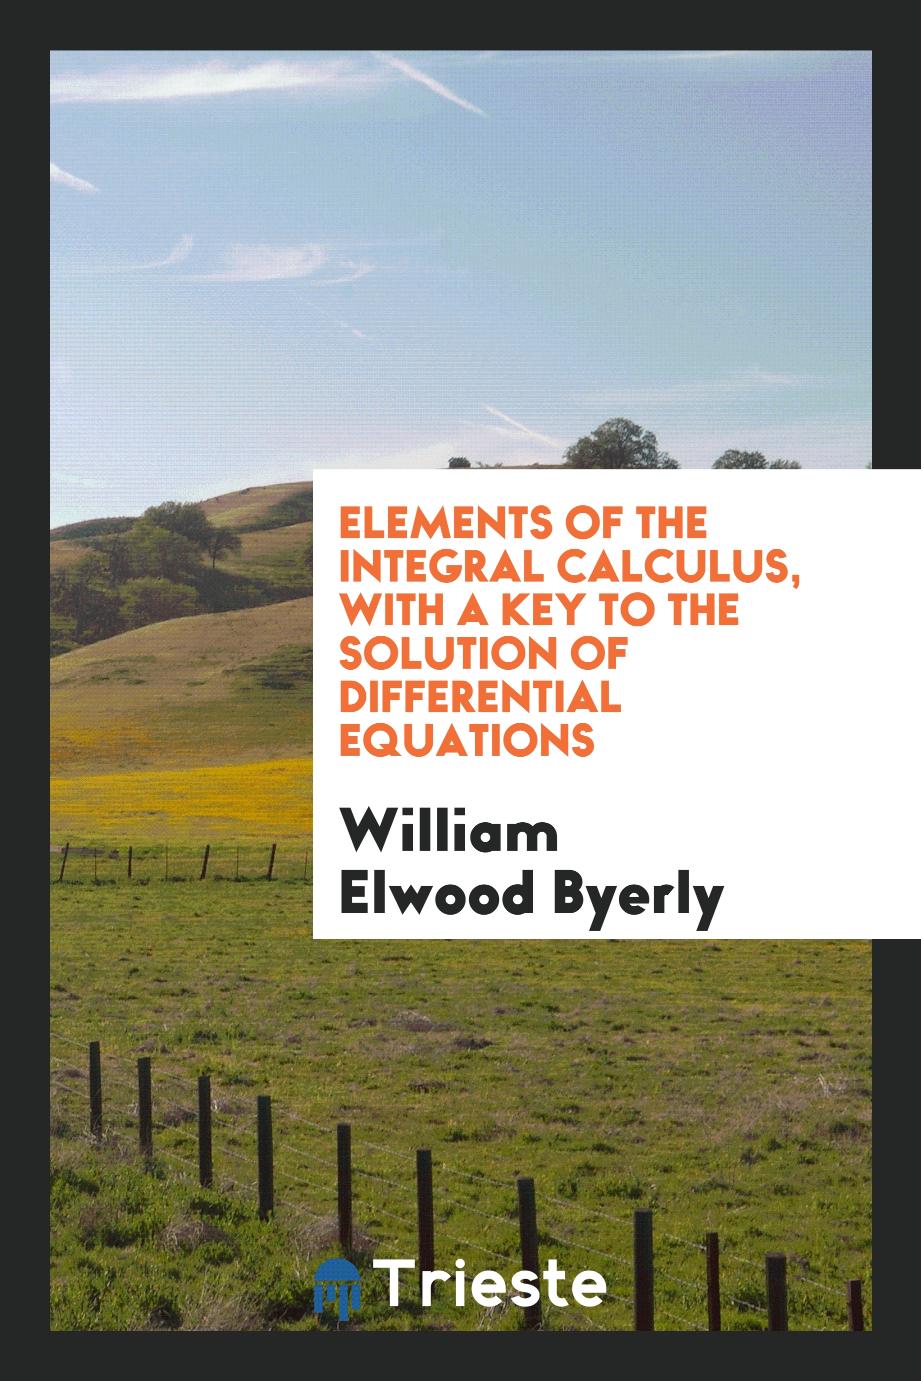 William Elwood Byerly - Elements of the Integral Calculus, With a Key to the Solution of Differential Equations